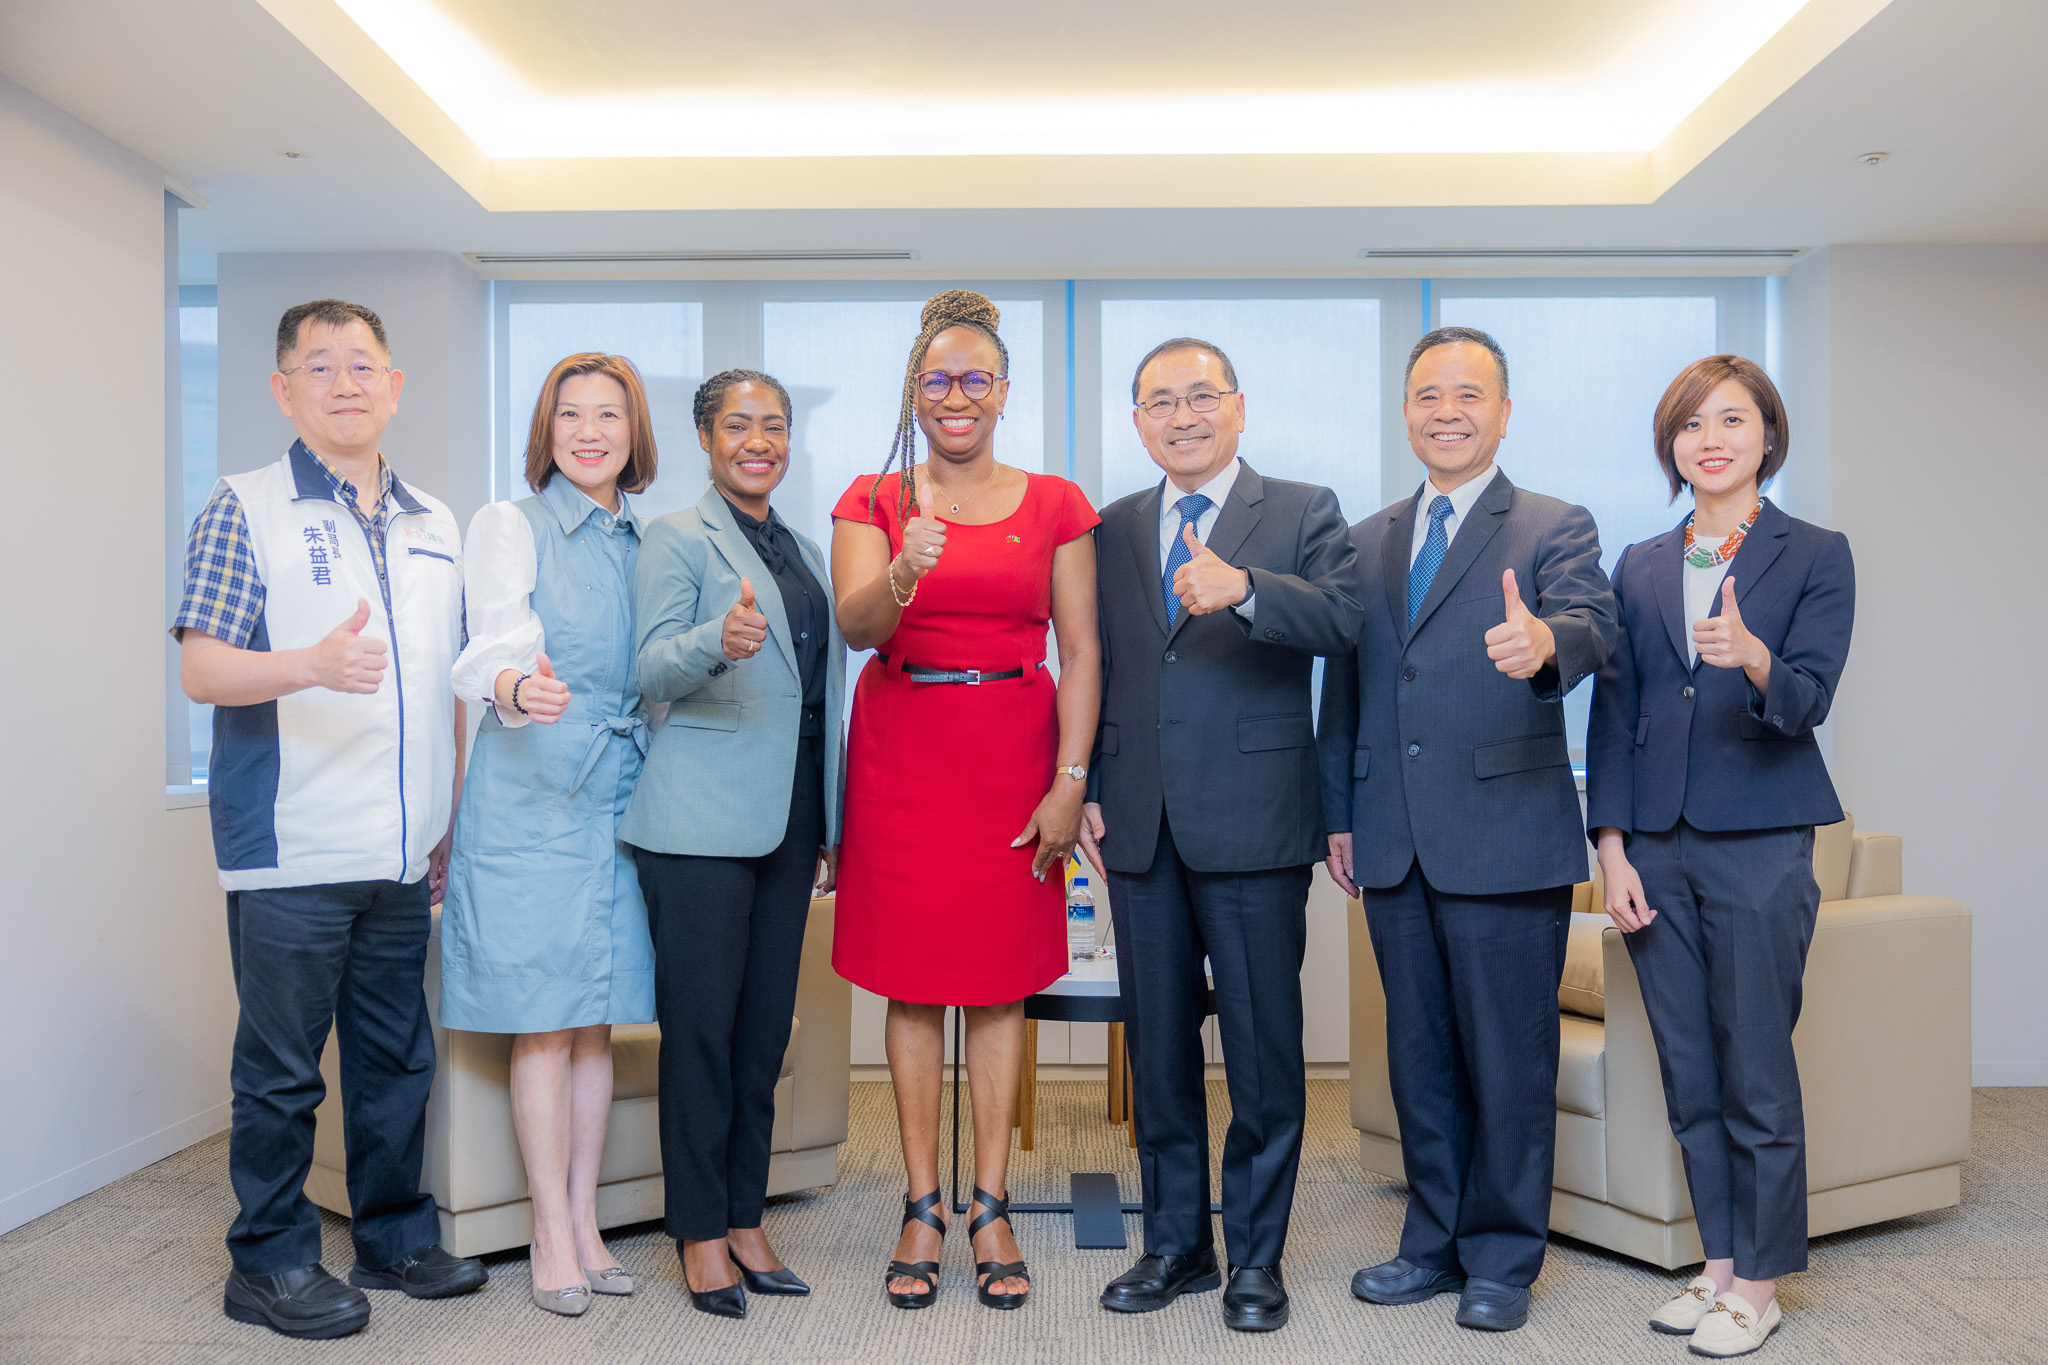 Ambassador Andrea Bowman (center) and Counsellor Ms. Shebby-Ann Dennie (third from left) visit New Taipei City Mayor Hou Yu-ih (third from right), accompanied by Siku Yaway (Commissioner of the Indigenous Peoples Department, from right), Lee Ching-an (Commissioner of the Fire Department), Yao Ching-yu (Director-general of the Secretariat), and Chu I-Chun (Deputy Director-general of the Environmental Protection Department).